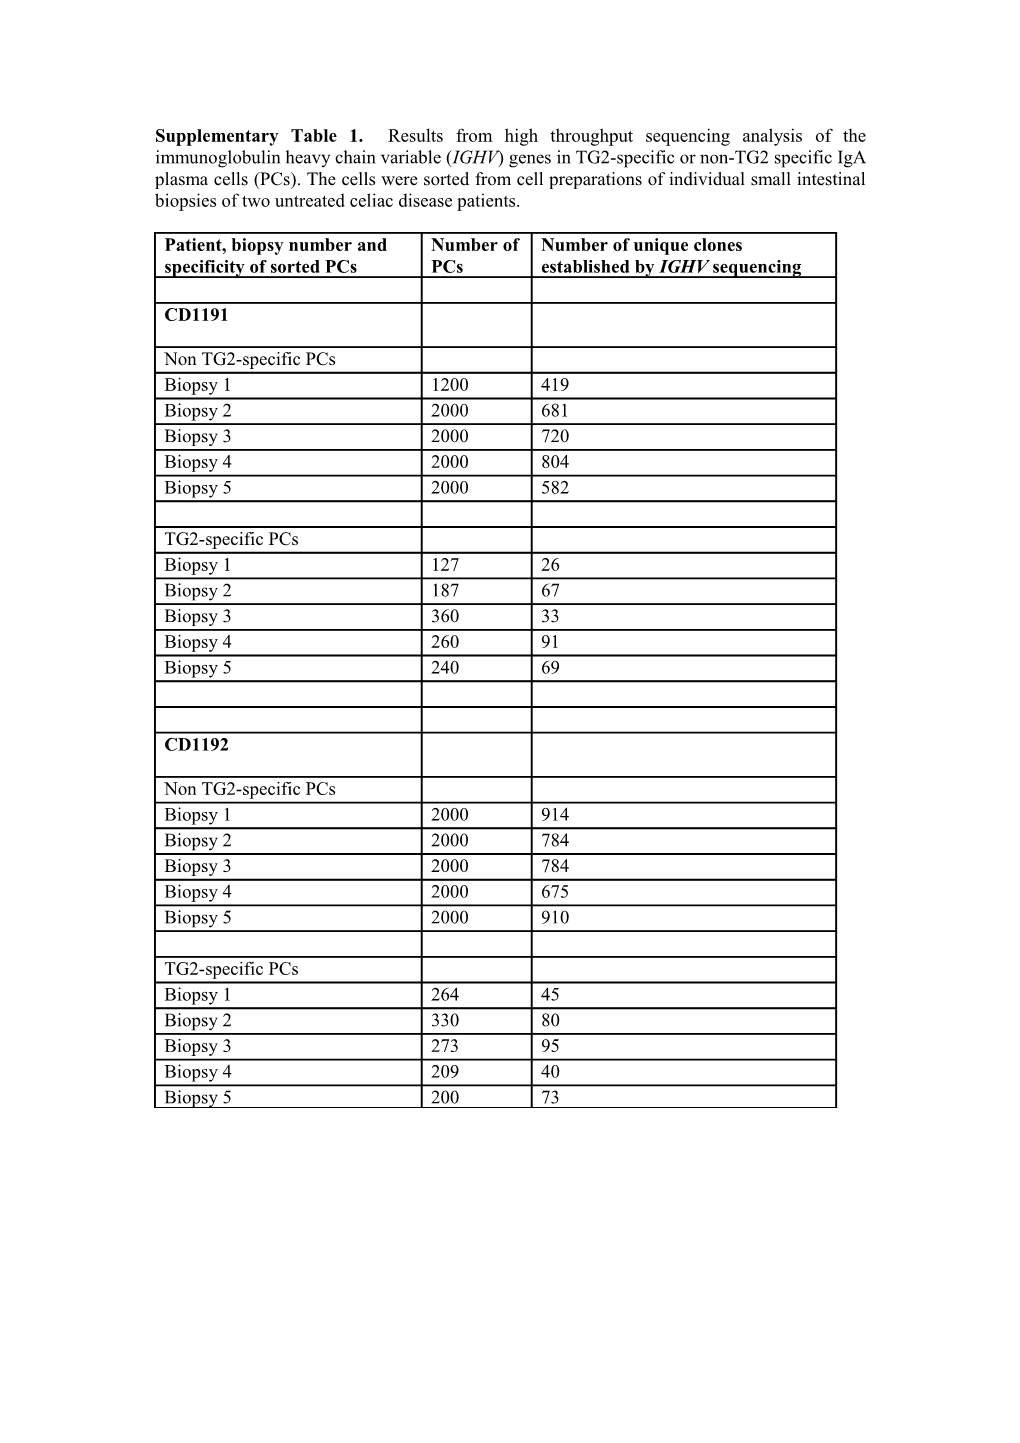 Supplementary Table 1. Results from High Throughput Sequencing Analysis of the Immunoglobulin